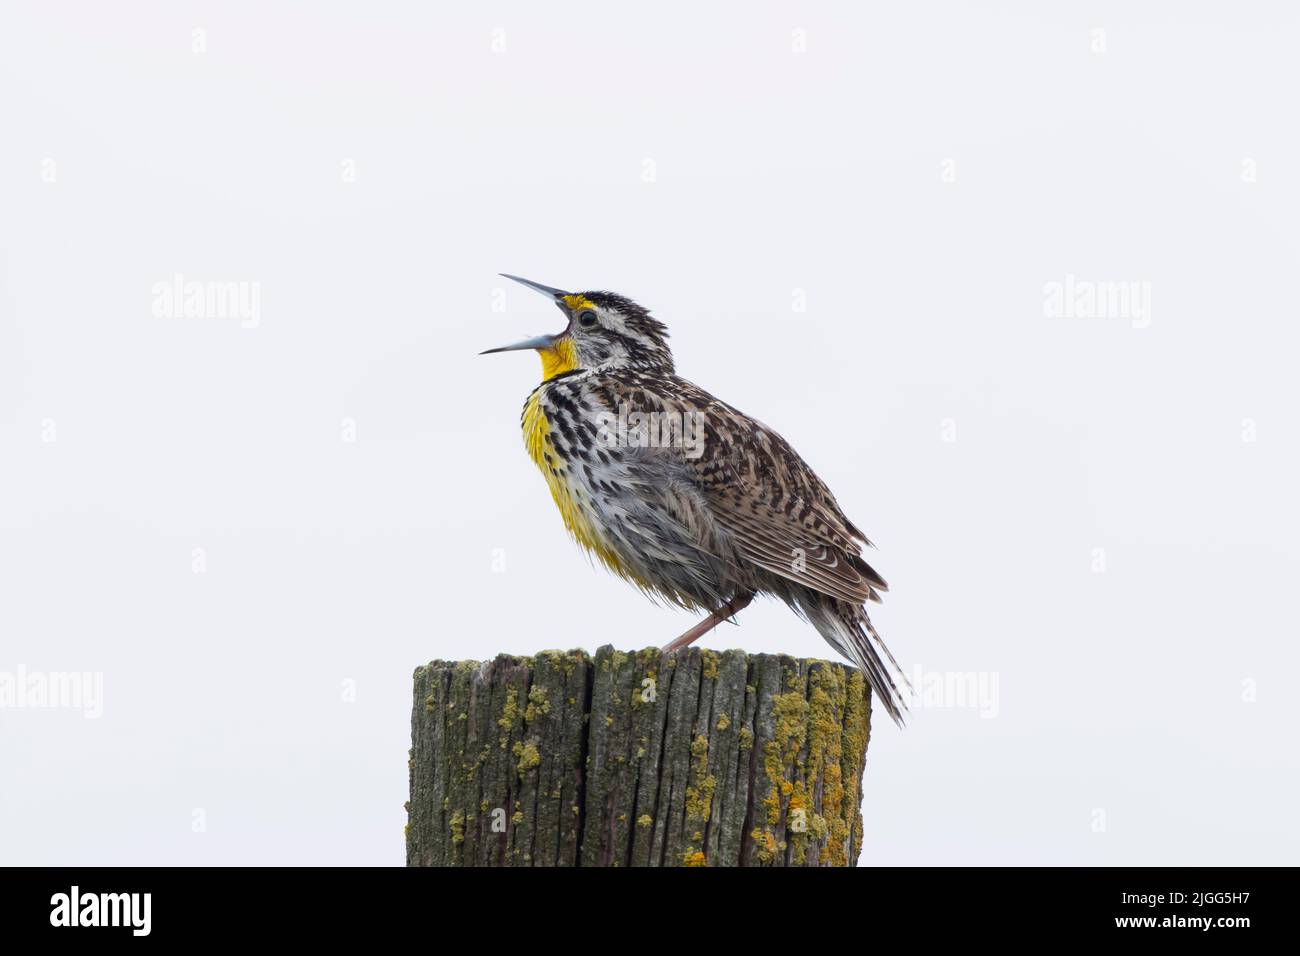 An adult Western Meadowlark, Sturnella neglecta, singing from its territorial perch at the San Luis NWR, CA, USA. Stock Photo